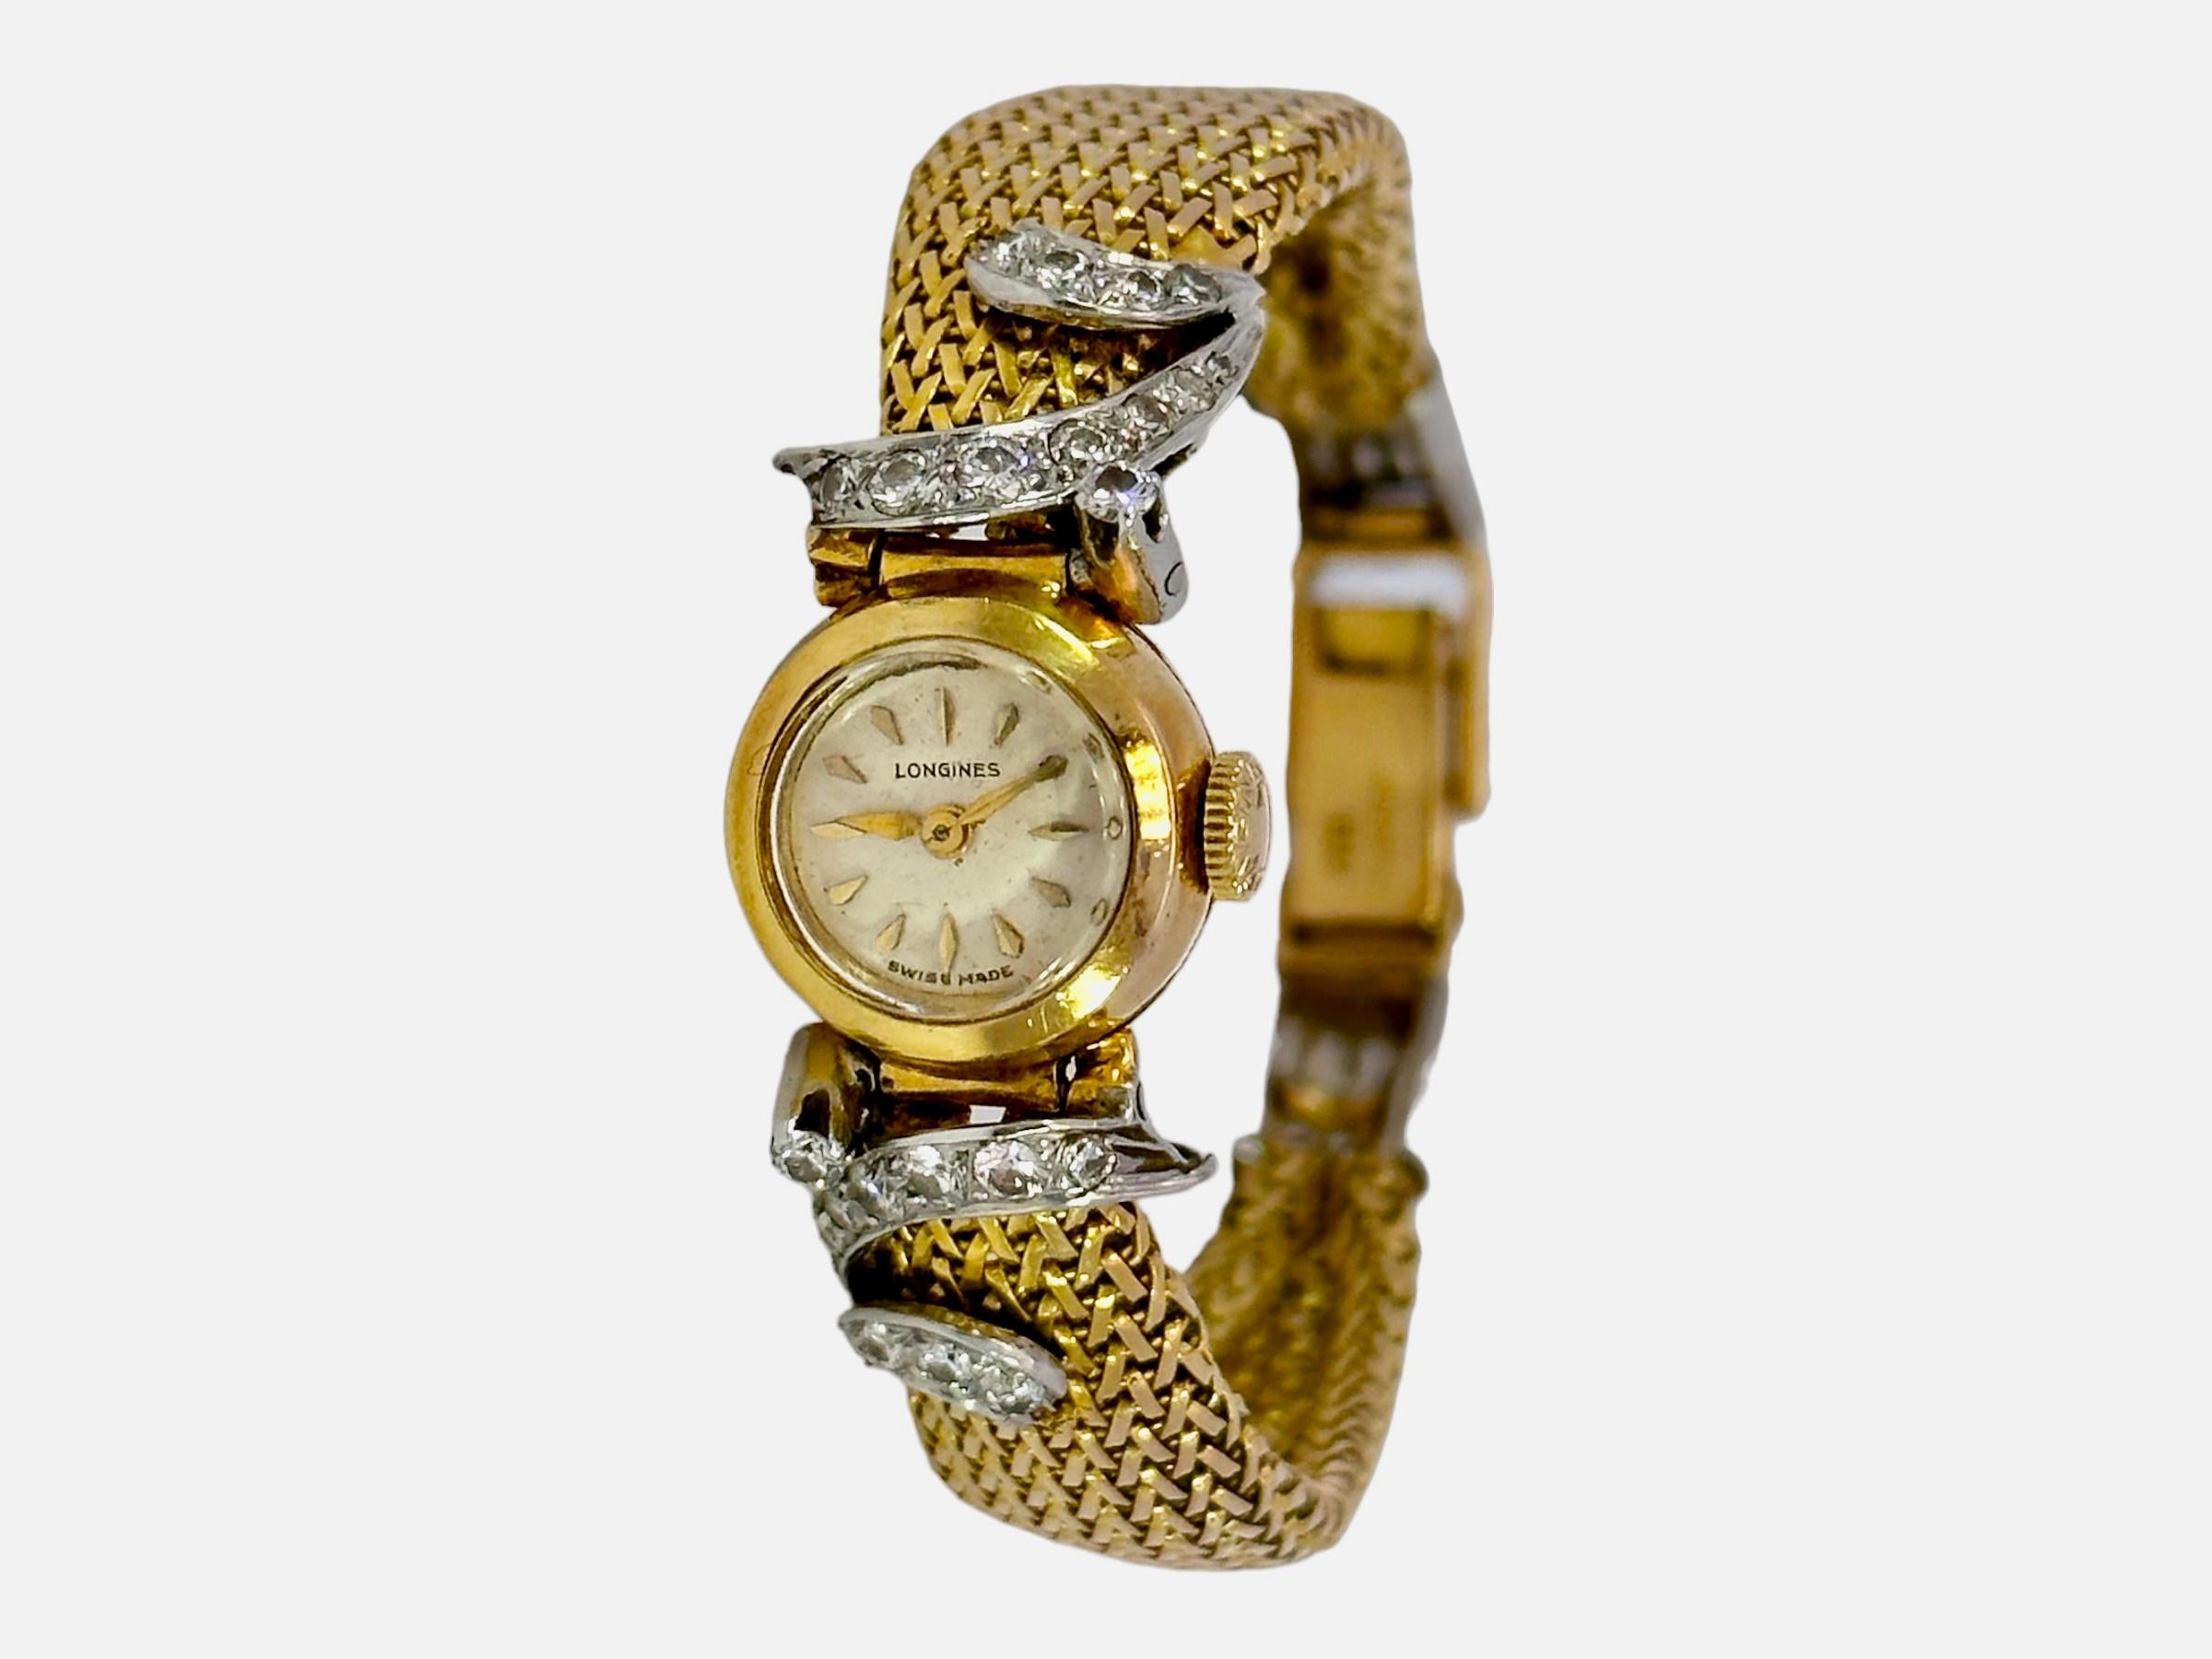 18Kt Yellow Gold Longines Lady Dress Watch with Diamonds

Movement: Mechanical Manual Winding

Case: 18kt yellow gold case, 13.5mm x 6.8mm

Dial: Gold dial with golden indexes

Bracelet strap: 18kt Yellow gold bracelet, with Round & Baguette